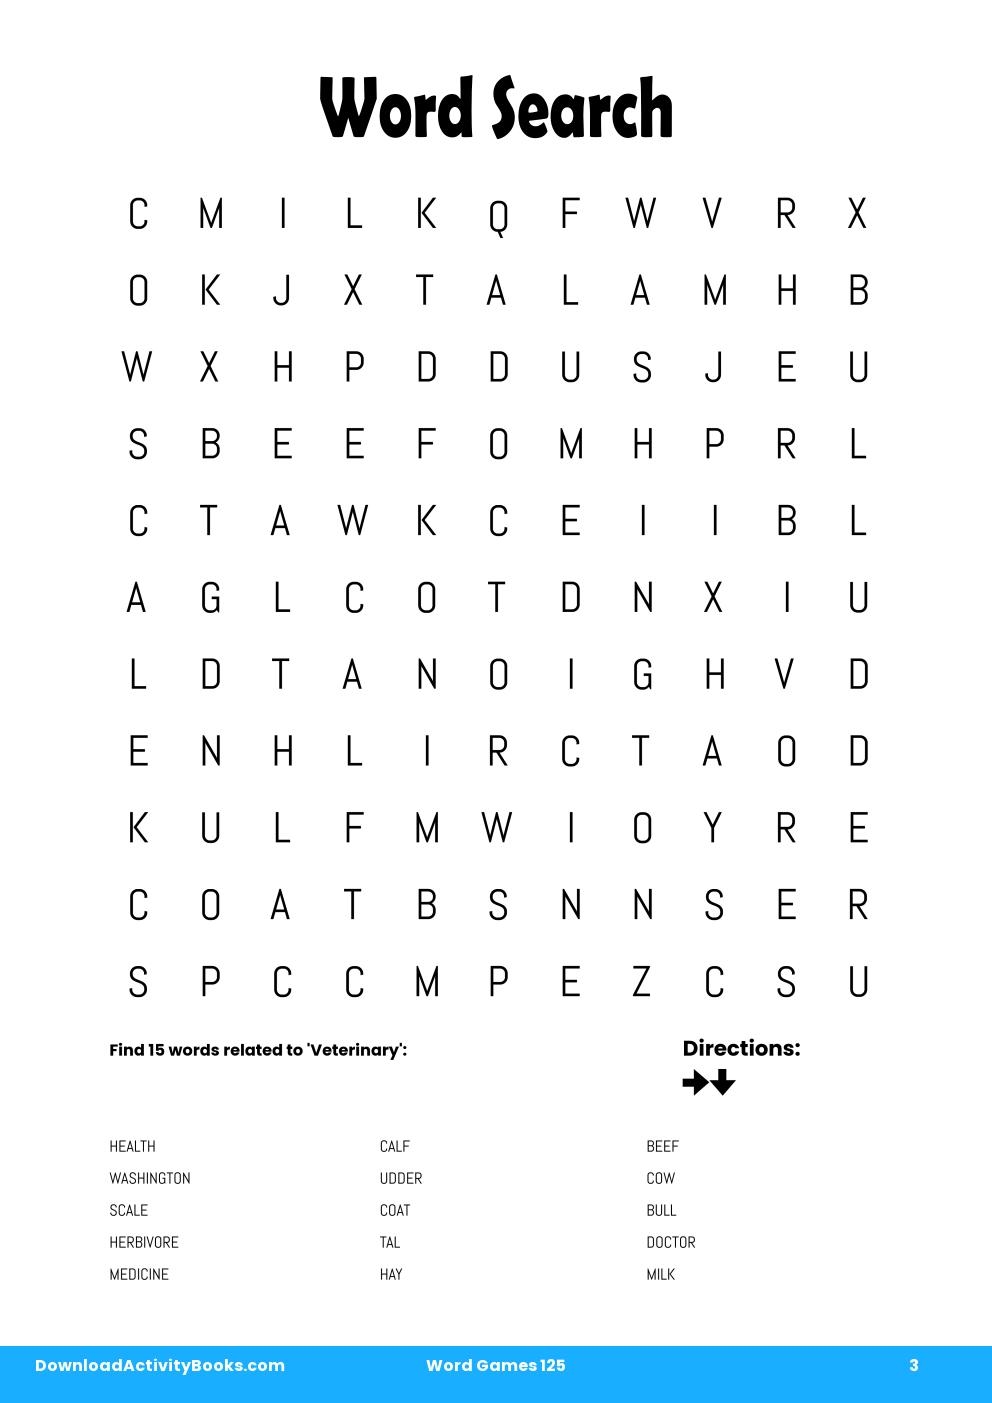 Word Search in Word Games 125